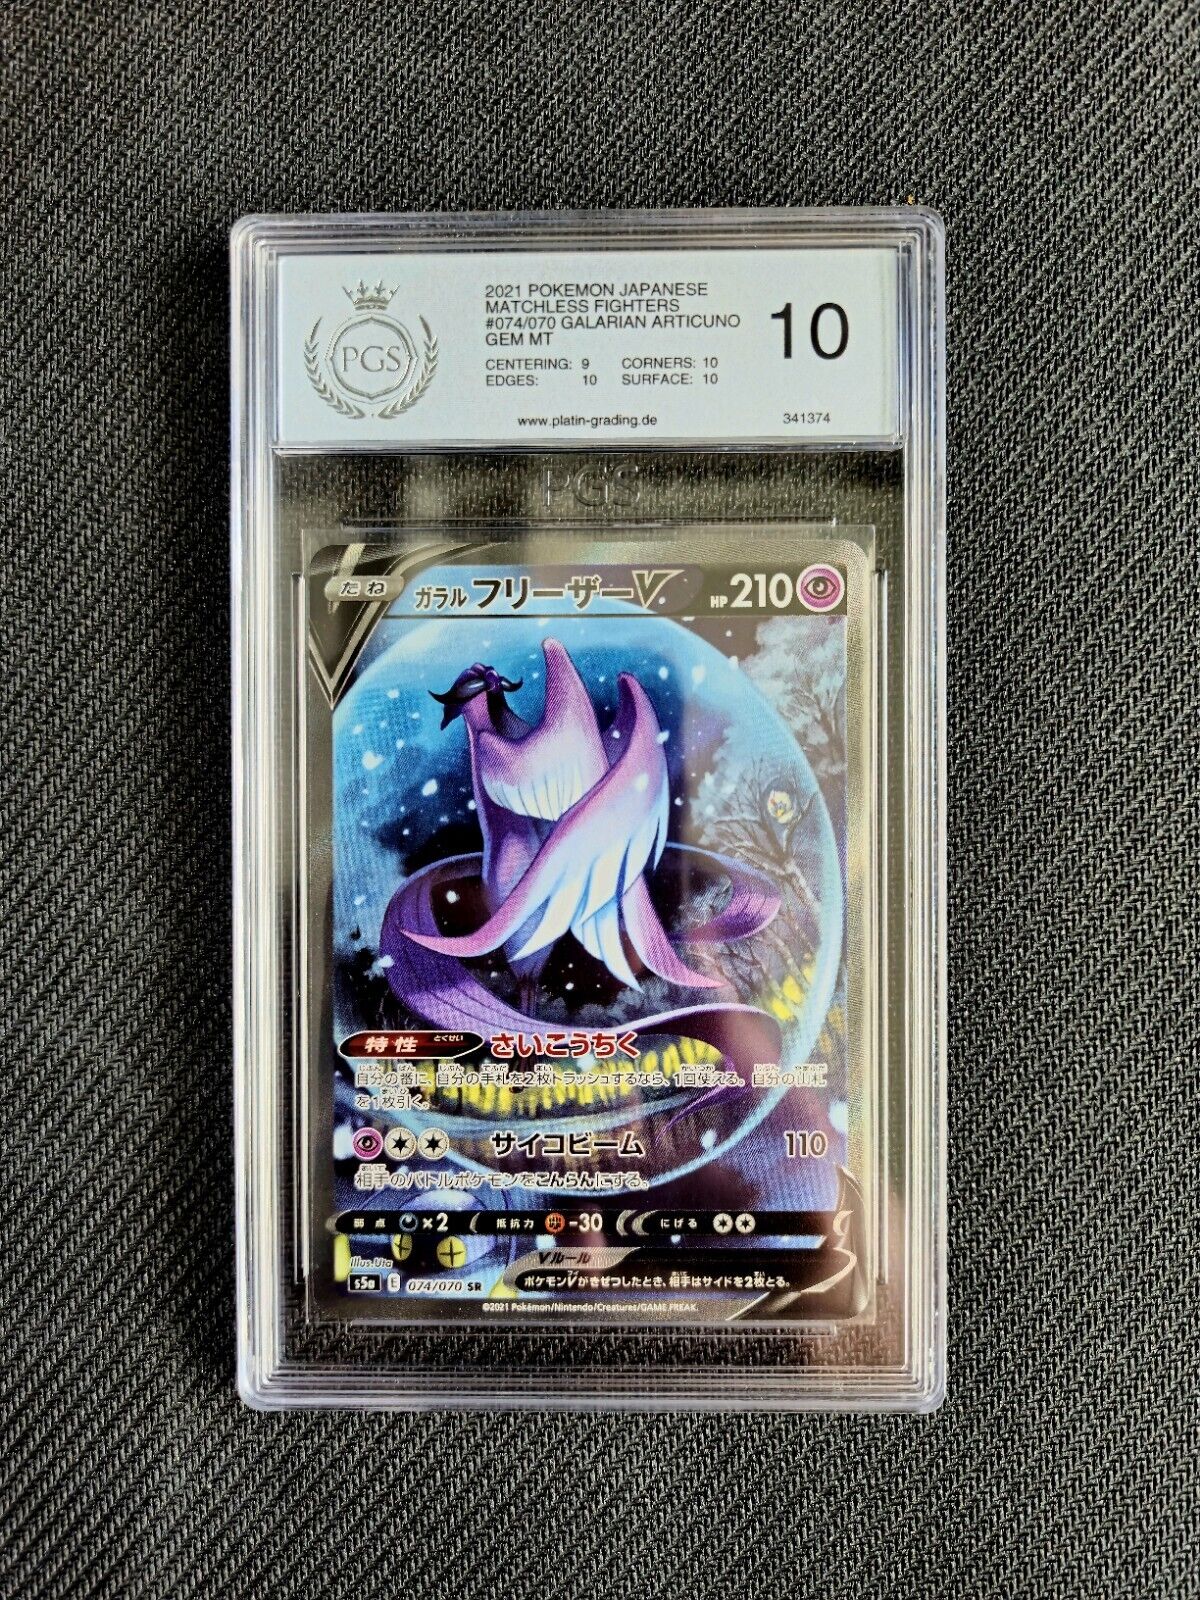 Pokemon TCG Card Galar Articuno Japanese Matchless Fighters PGS 10 GEM MT PSA